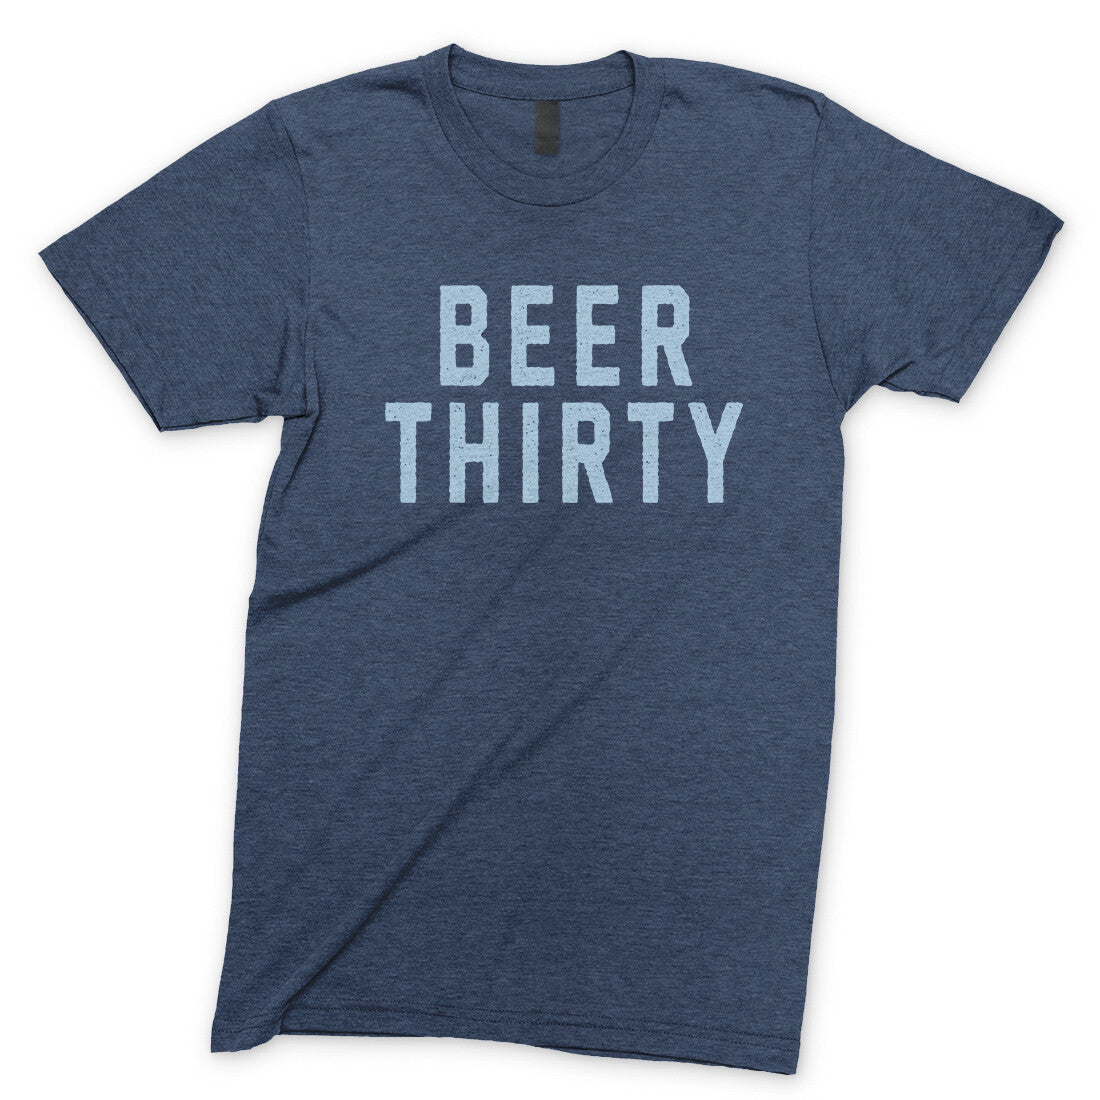 Beer Thirty in Navy Heather Color